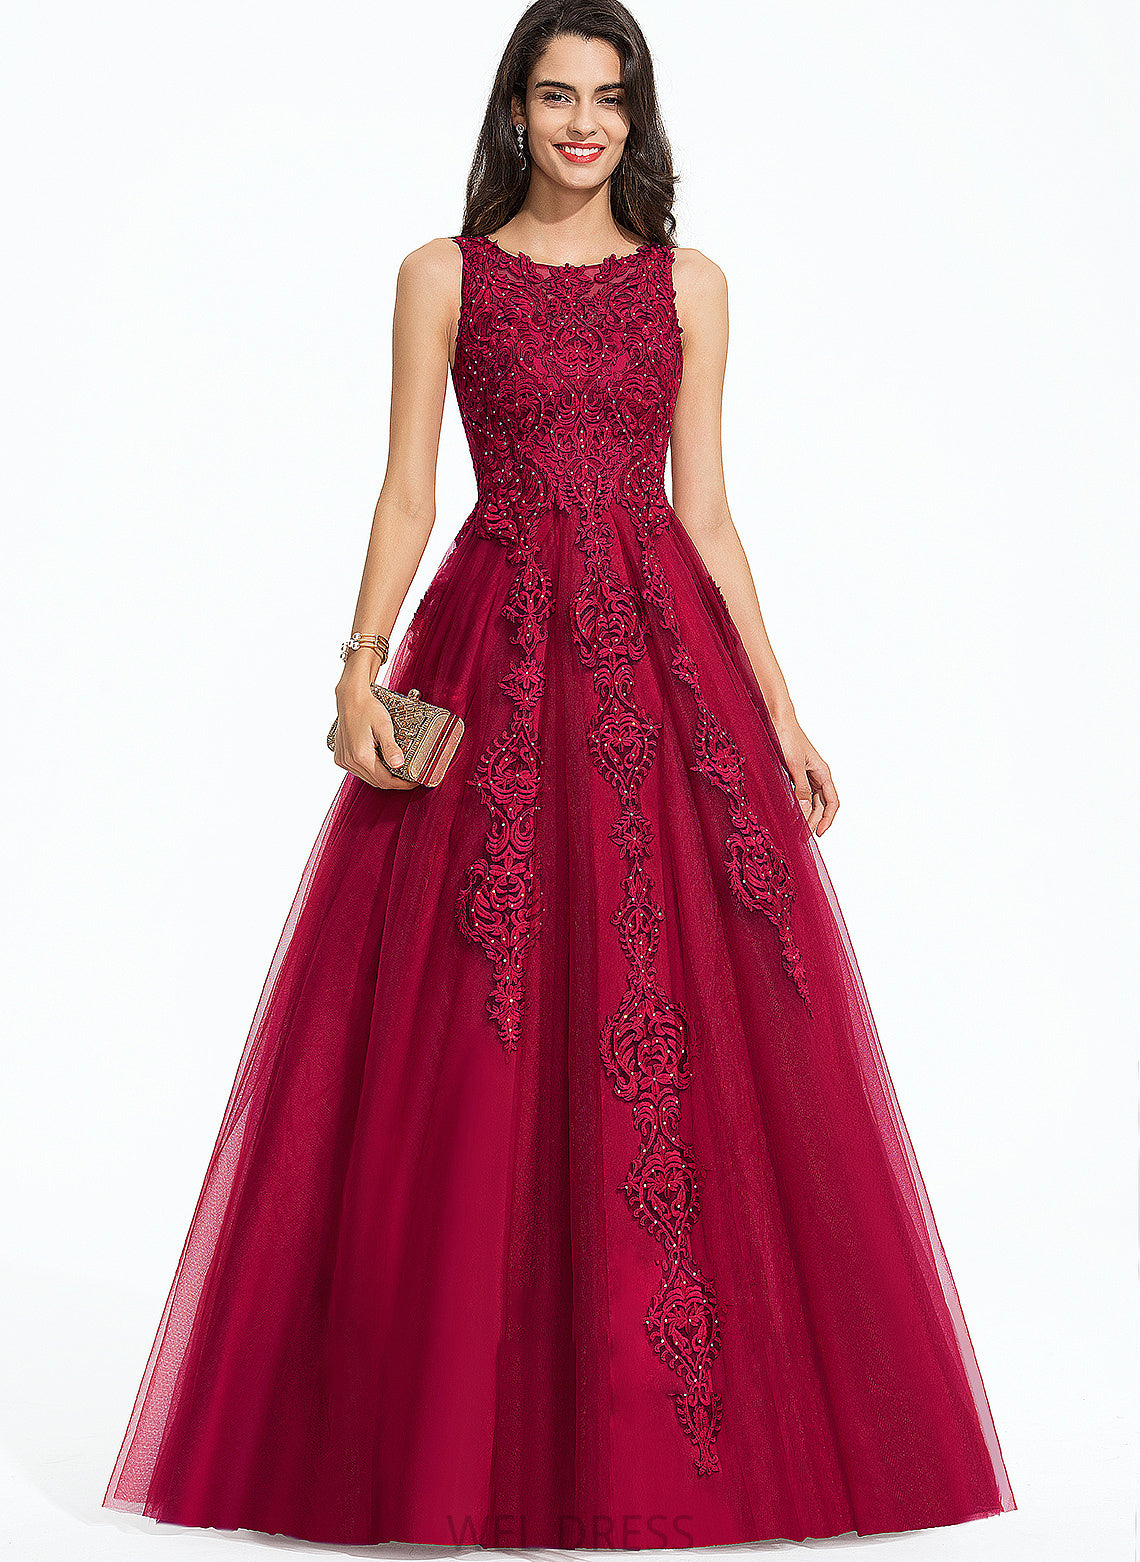 Alondra Scoop Neck Sweep Tulle Ball-Gown/Princess Beading With Train Prom Dresses